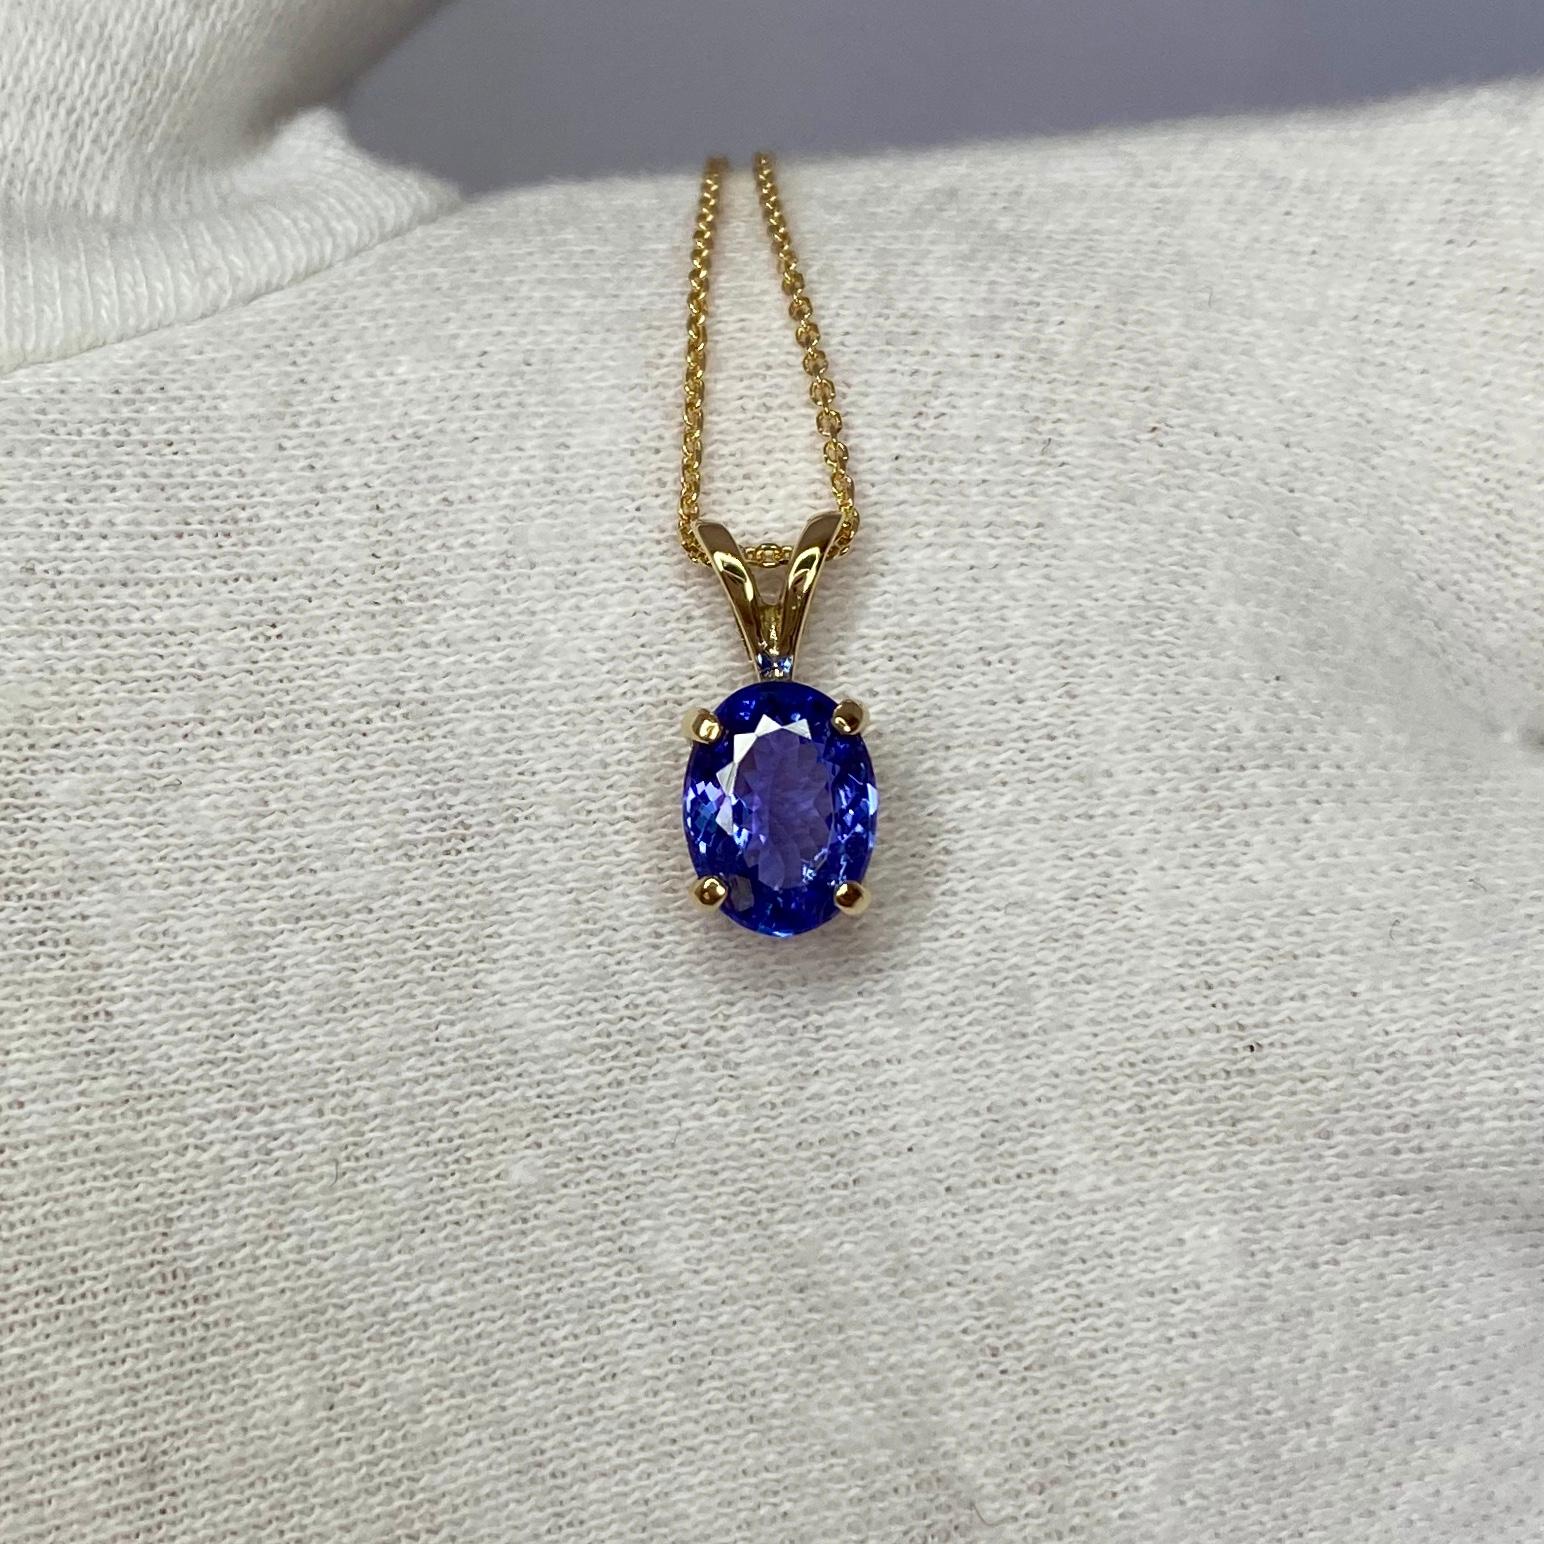 Stunning vivid blue violet natural tanzanite solitaire pendant. 

1.03 carat stone with vivid blue violet colour and good clarity, some small inclusions visible when looking closely but not a dirty stone.
Also has a very good oval cut which shows